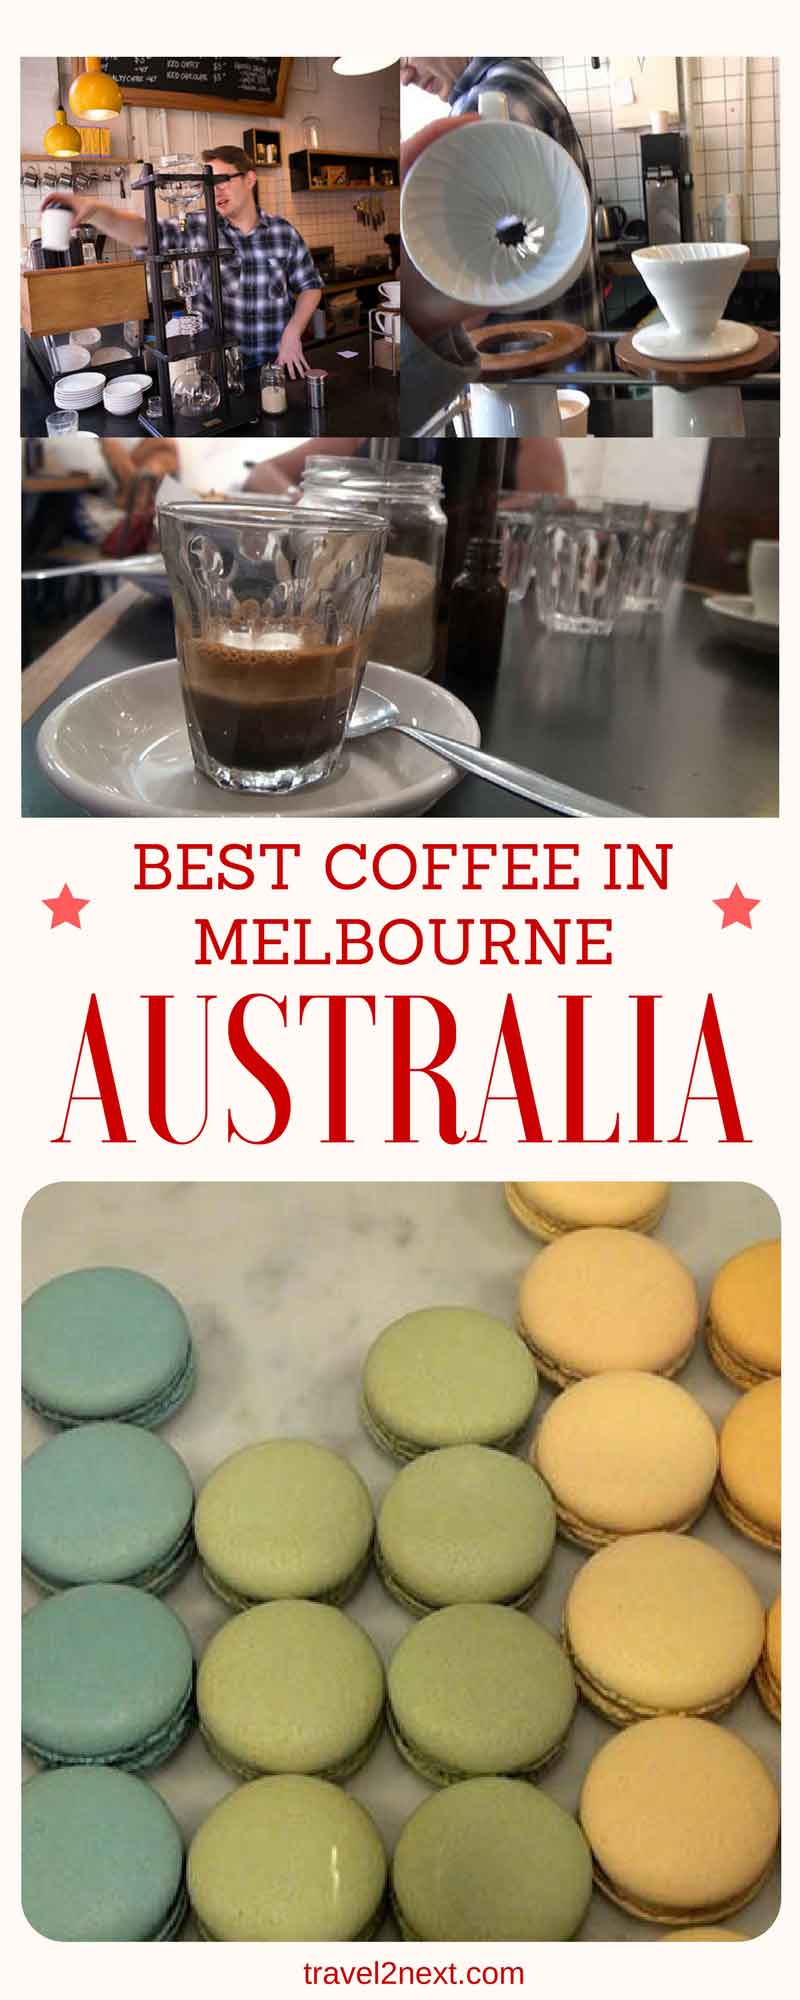 Best coffee in Melbourne